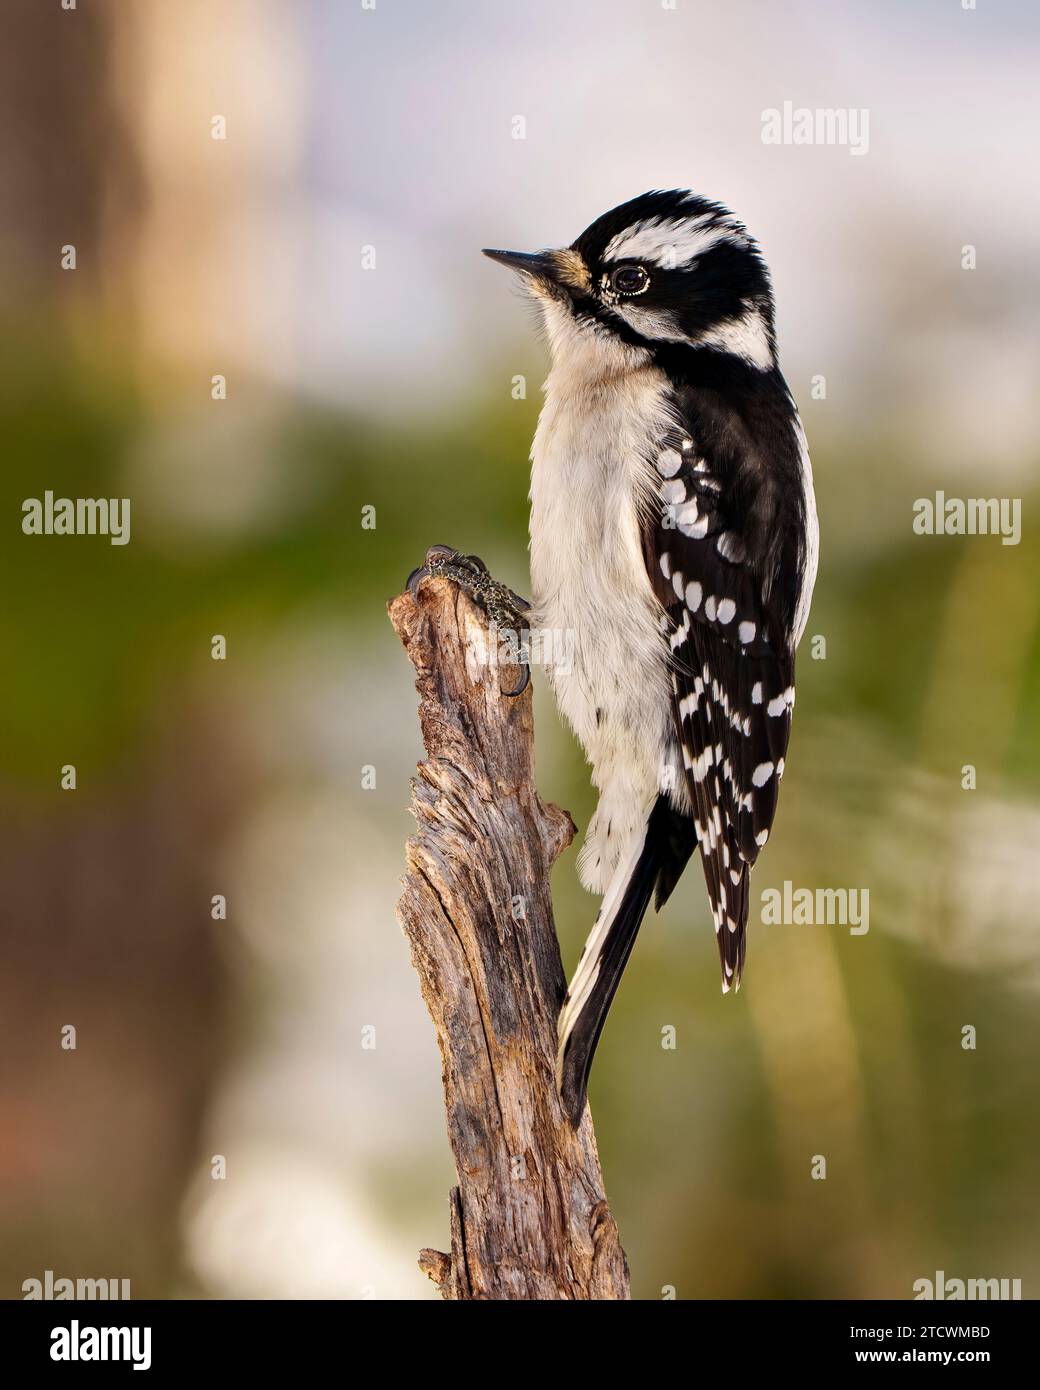 Woodpecker female standing on a twig with a blur forest background in its environment and habitat surrounding, displaying white and black feather plum Stock Photo